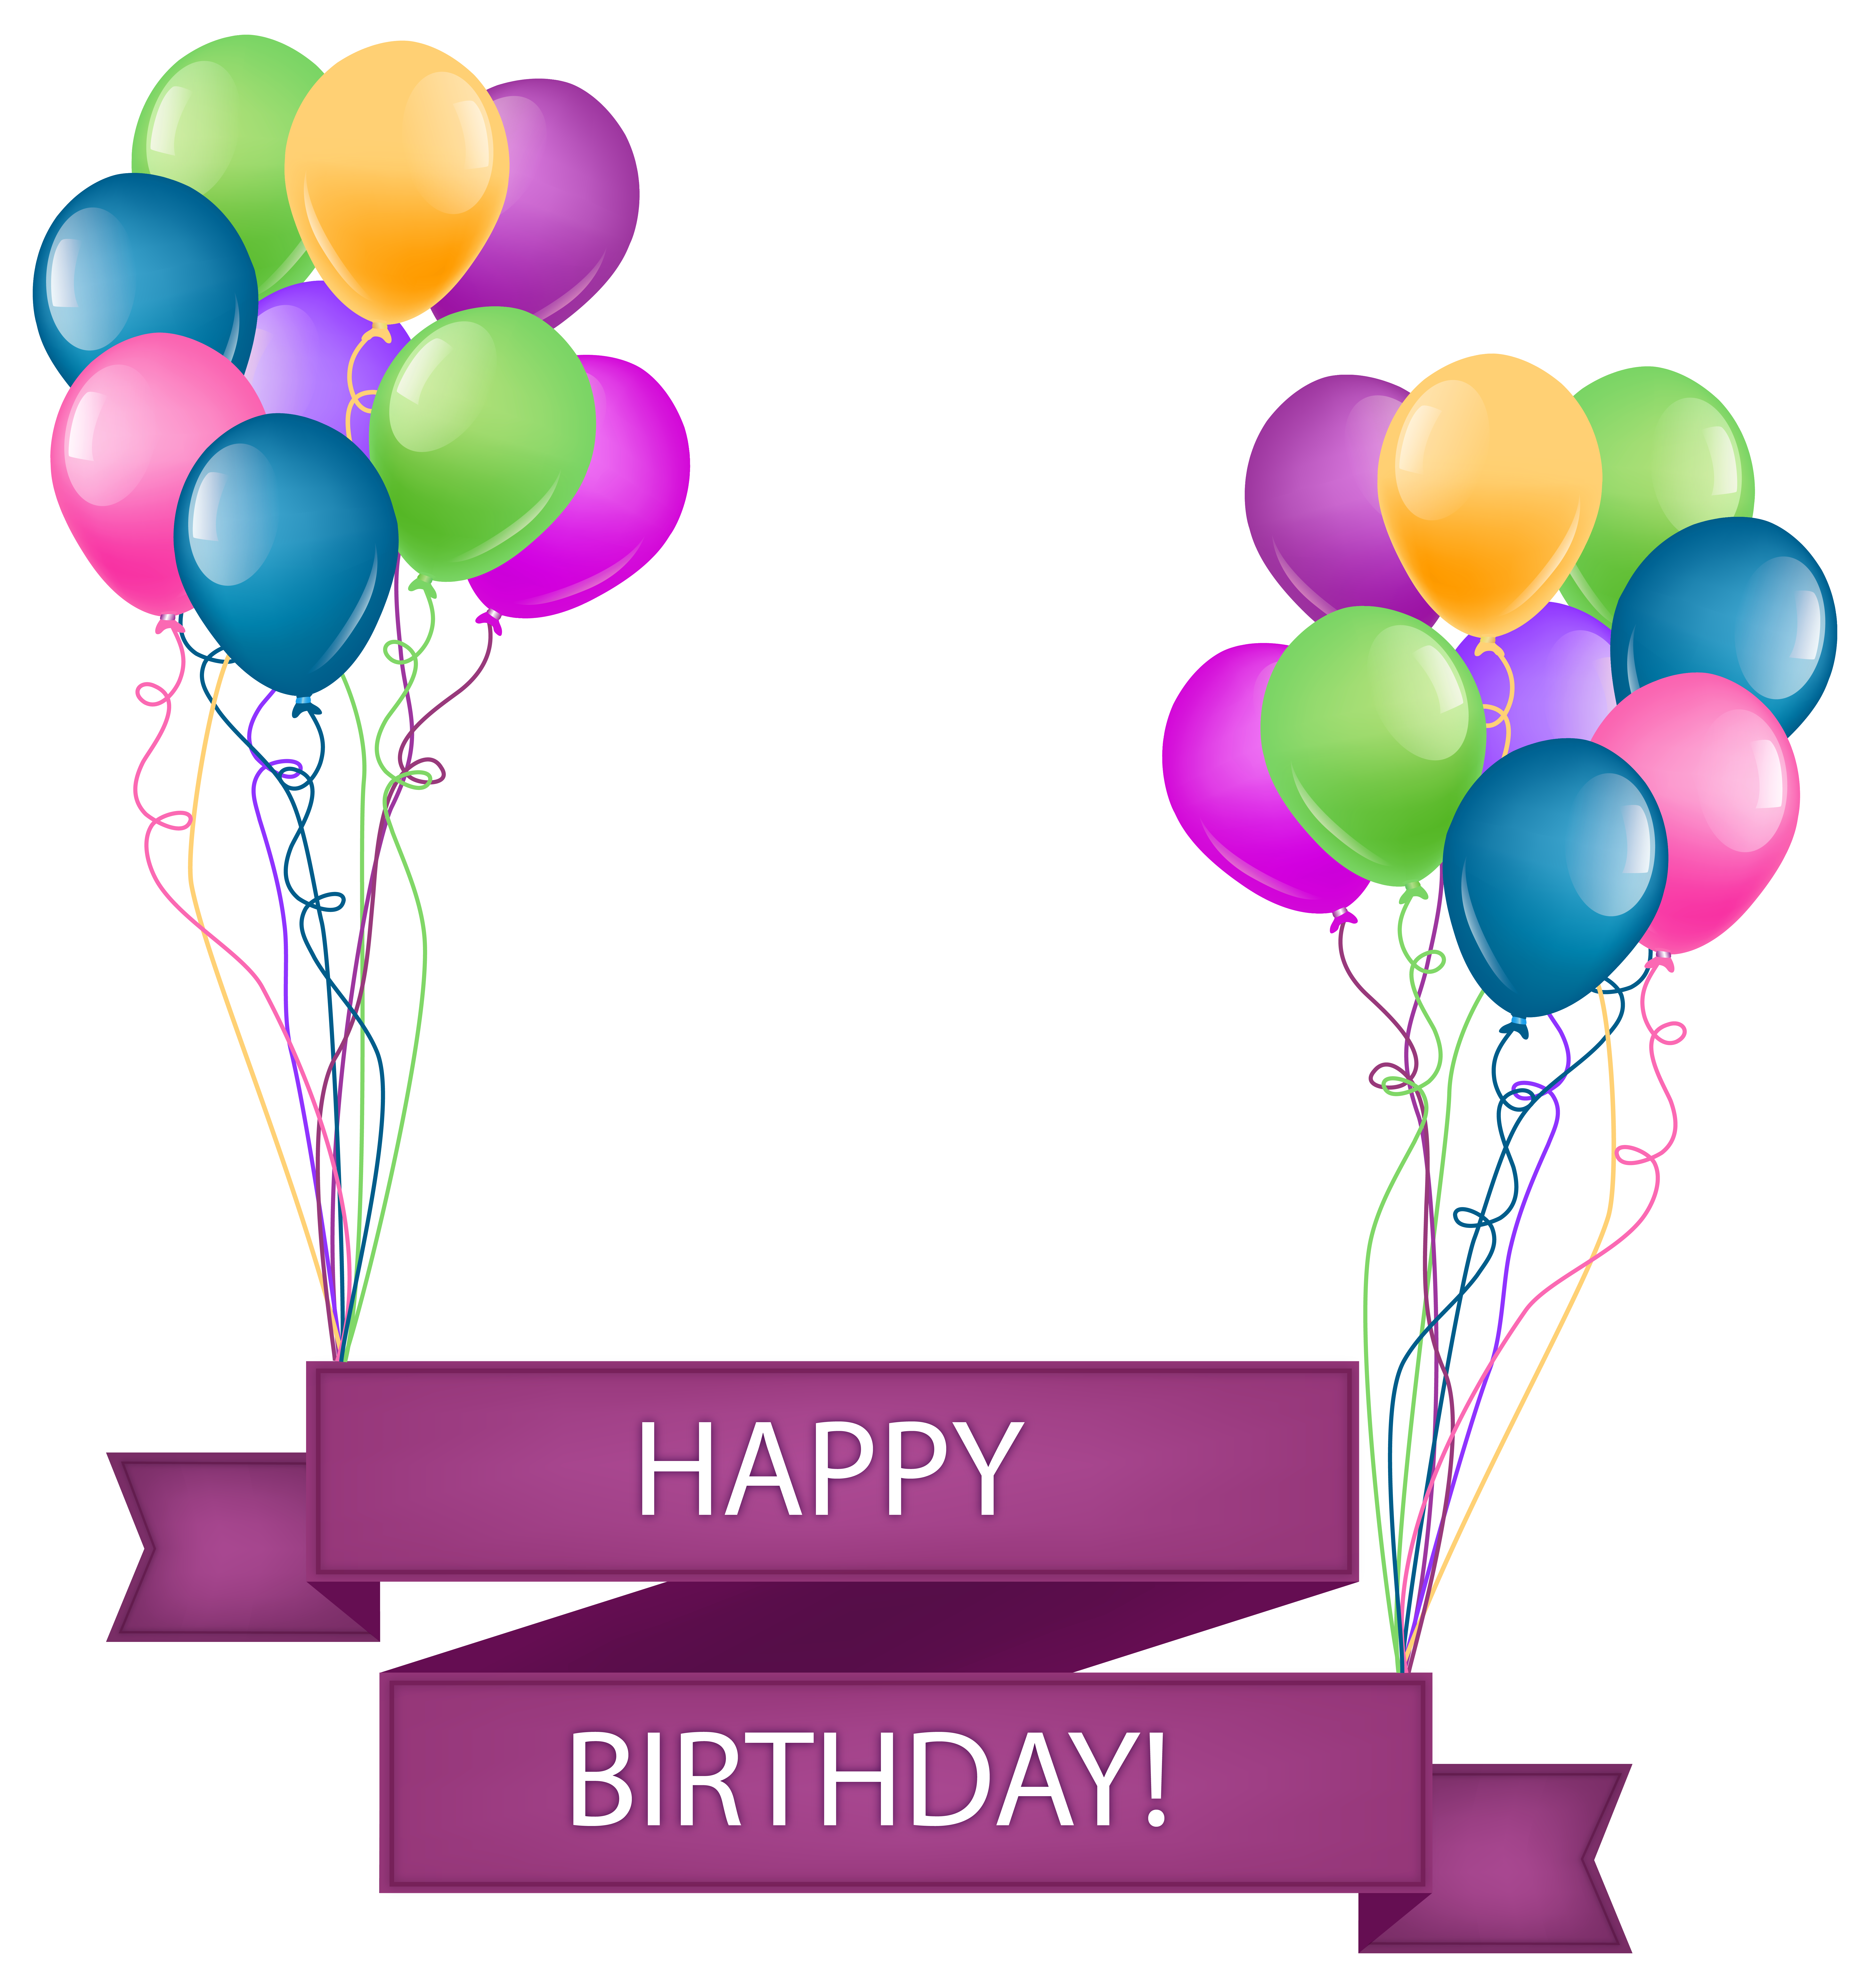 Happy birthday with balloons. Free clipart banner